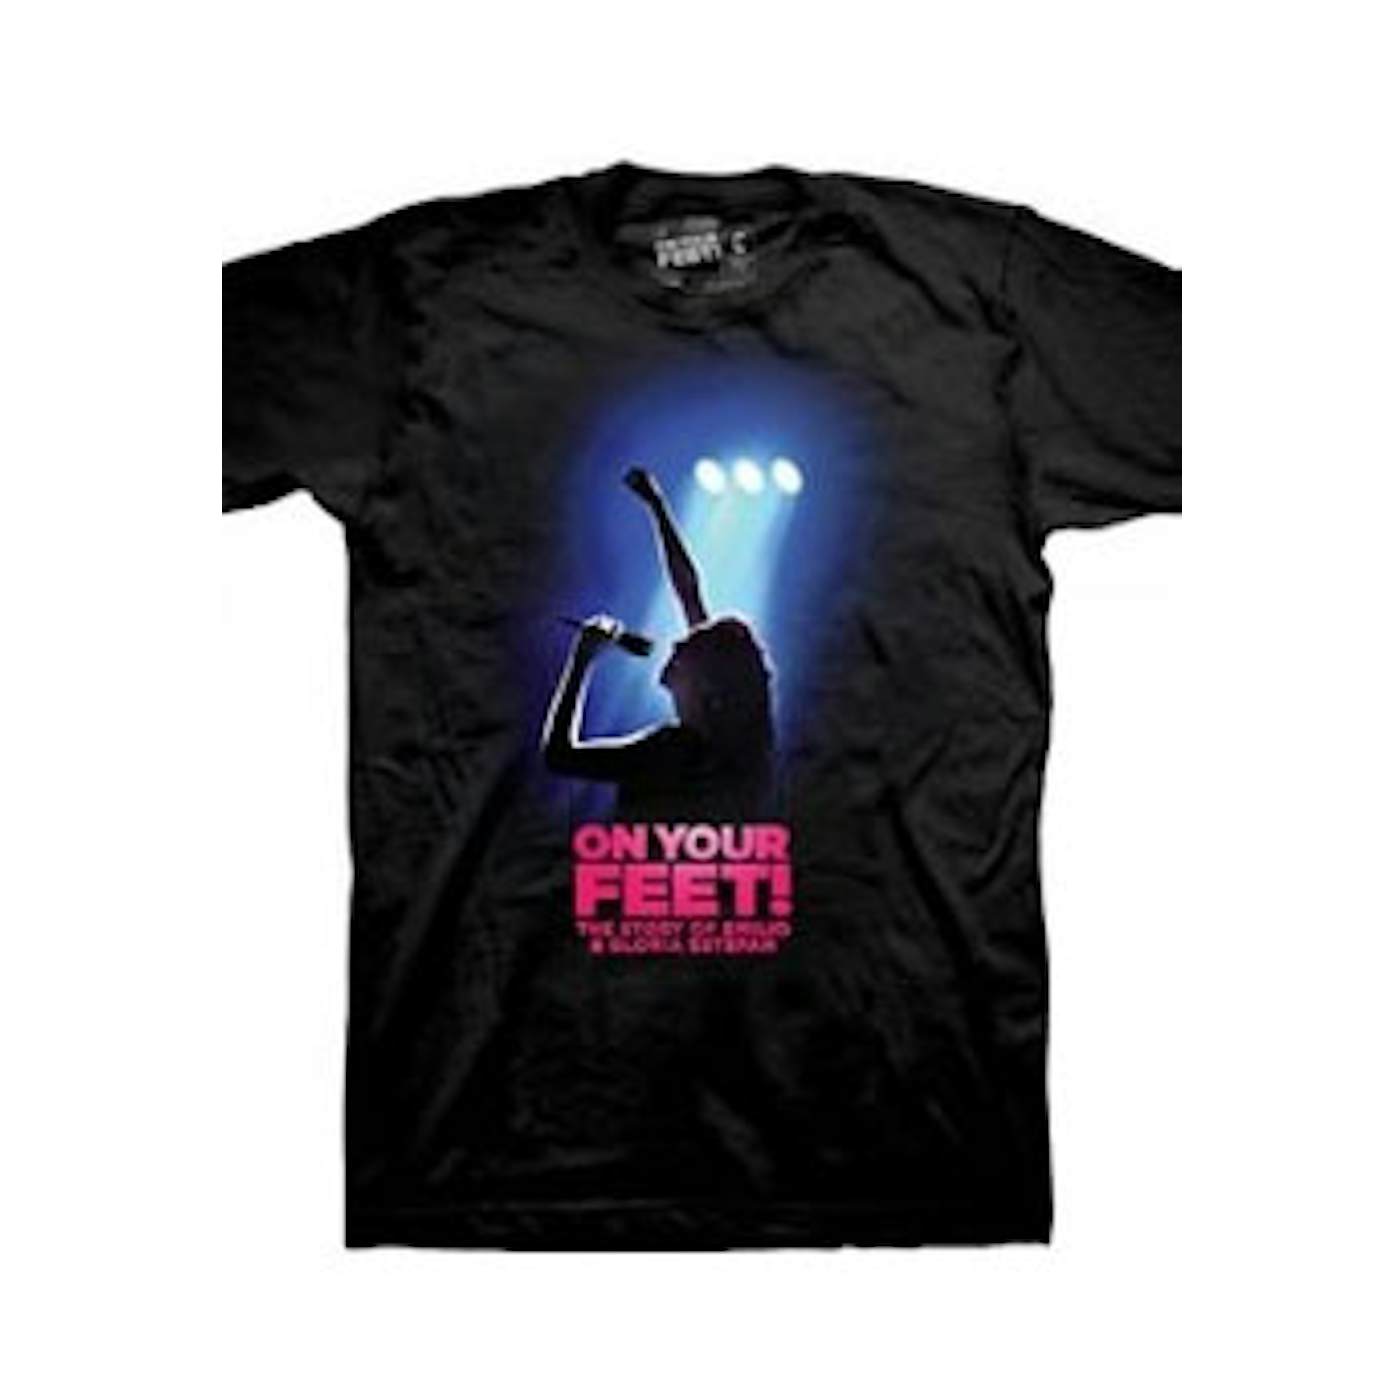 ON YOUR FEET: THE STORY OF EMILIO & GLORIA On Your Feet Show T-Shirt